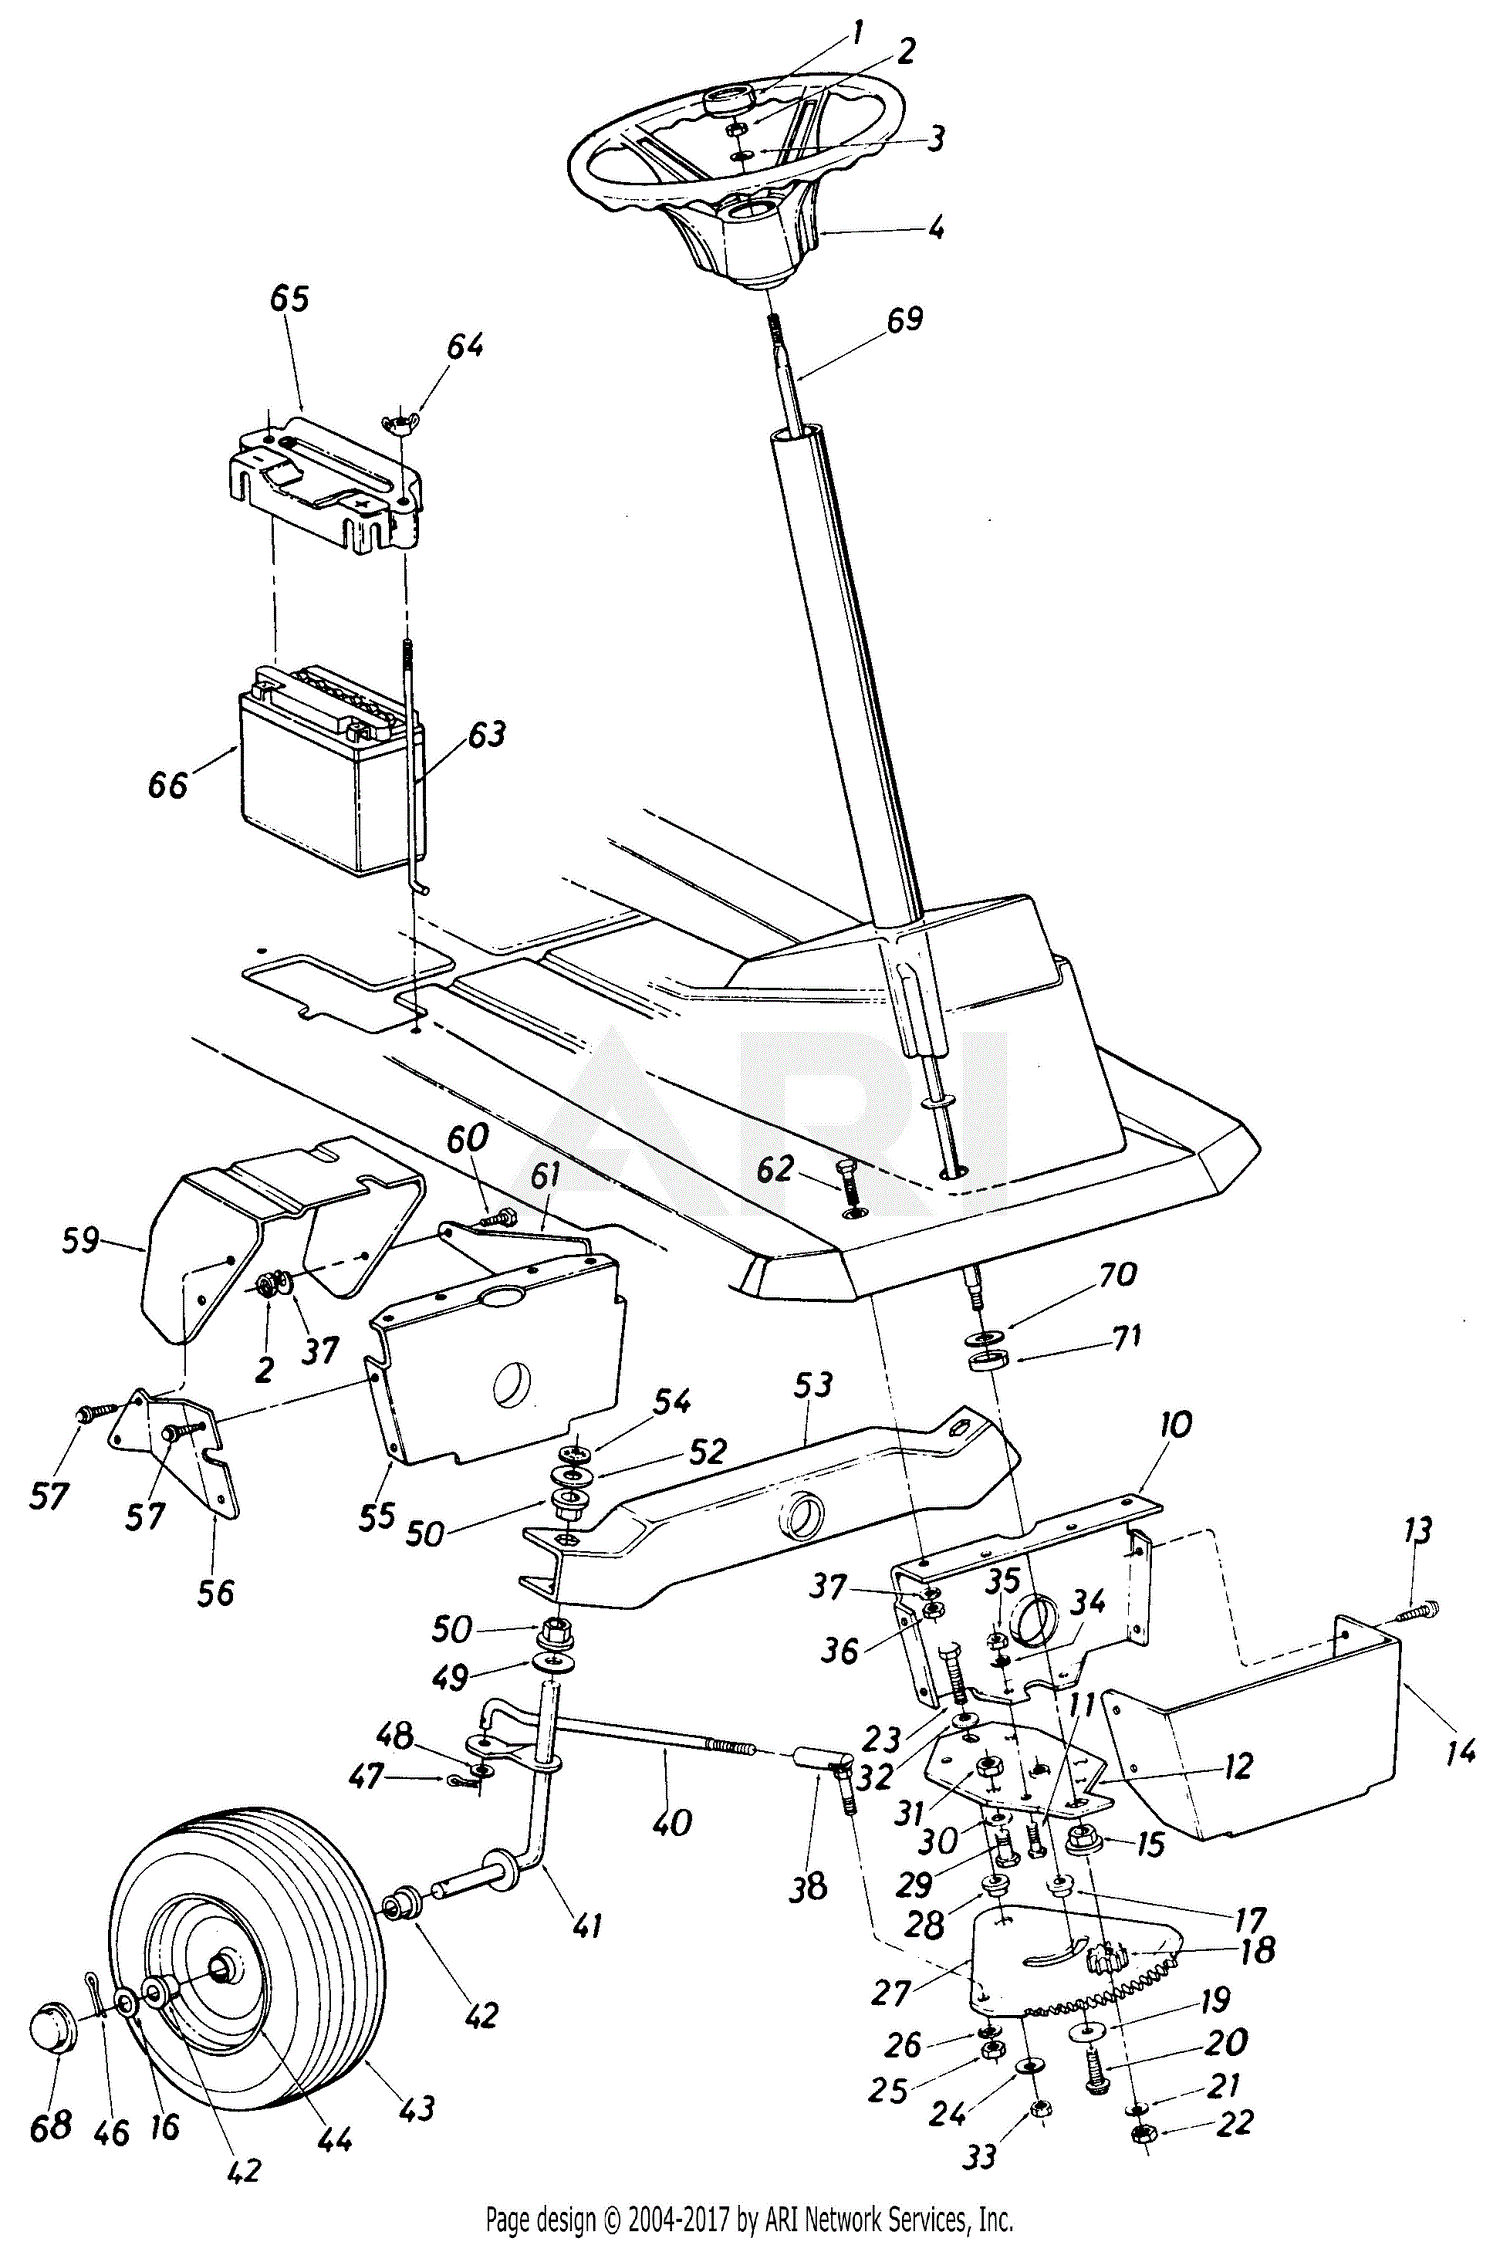 35 1996 Mtd Riding Lawn Mower Diagram Wire Diagram Source Information